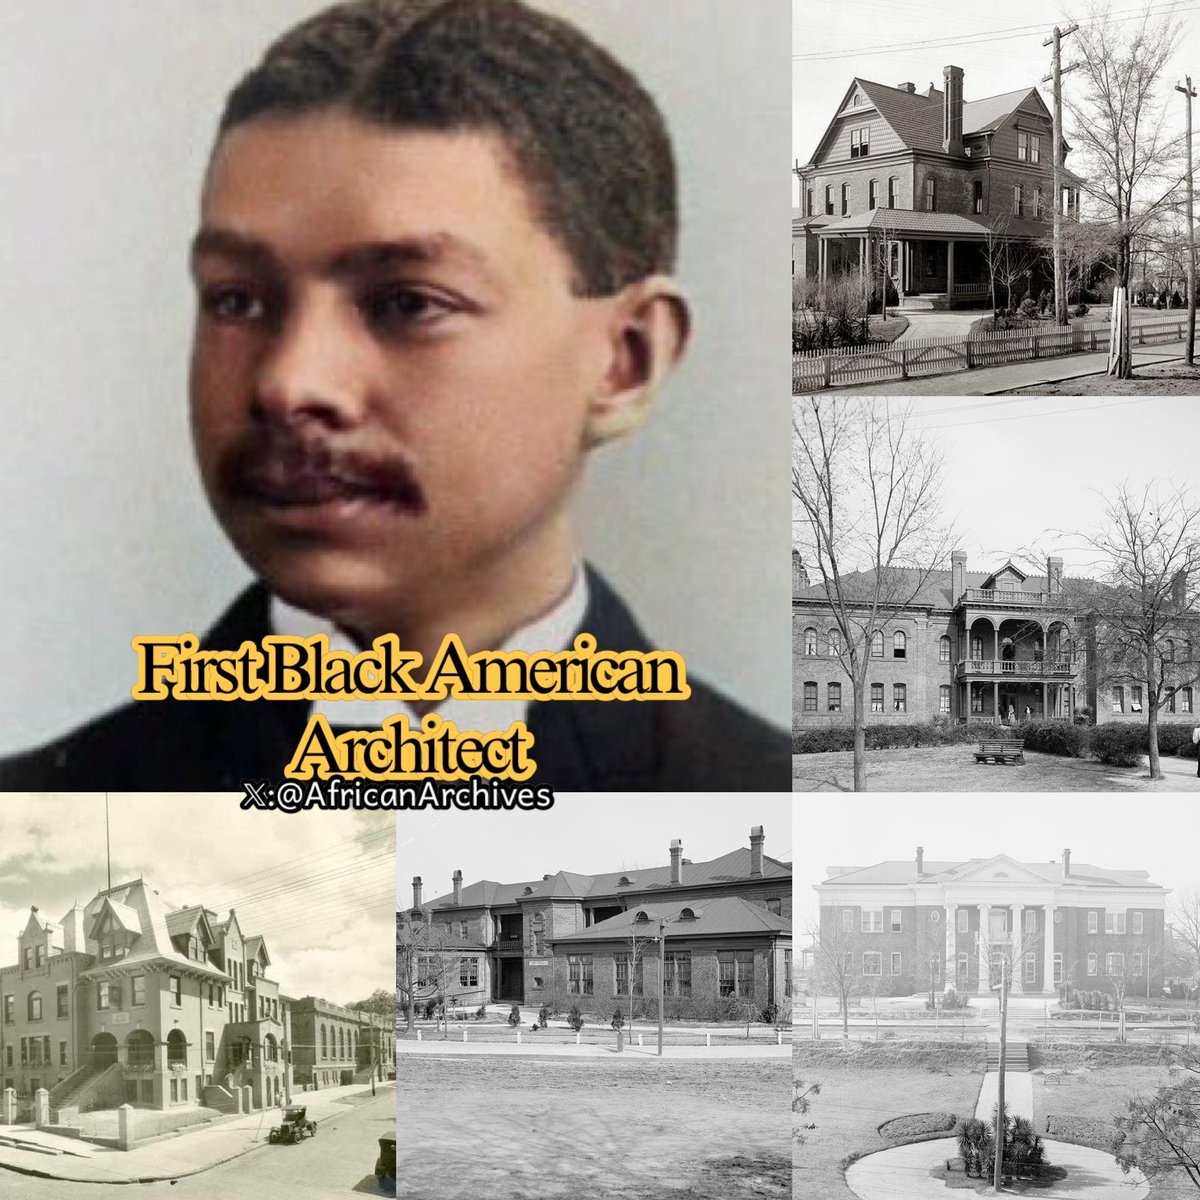 The first black American architect to graduate from MIT and the country’s first academically trained black architect, Robert R. Taylor was truly groundbreaking. Born in North Carolina in 1868, he learned carpentry and construction from his father, a former slave, and worked as a…